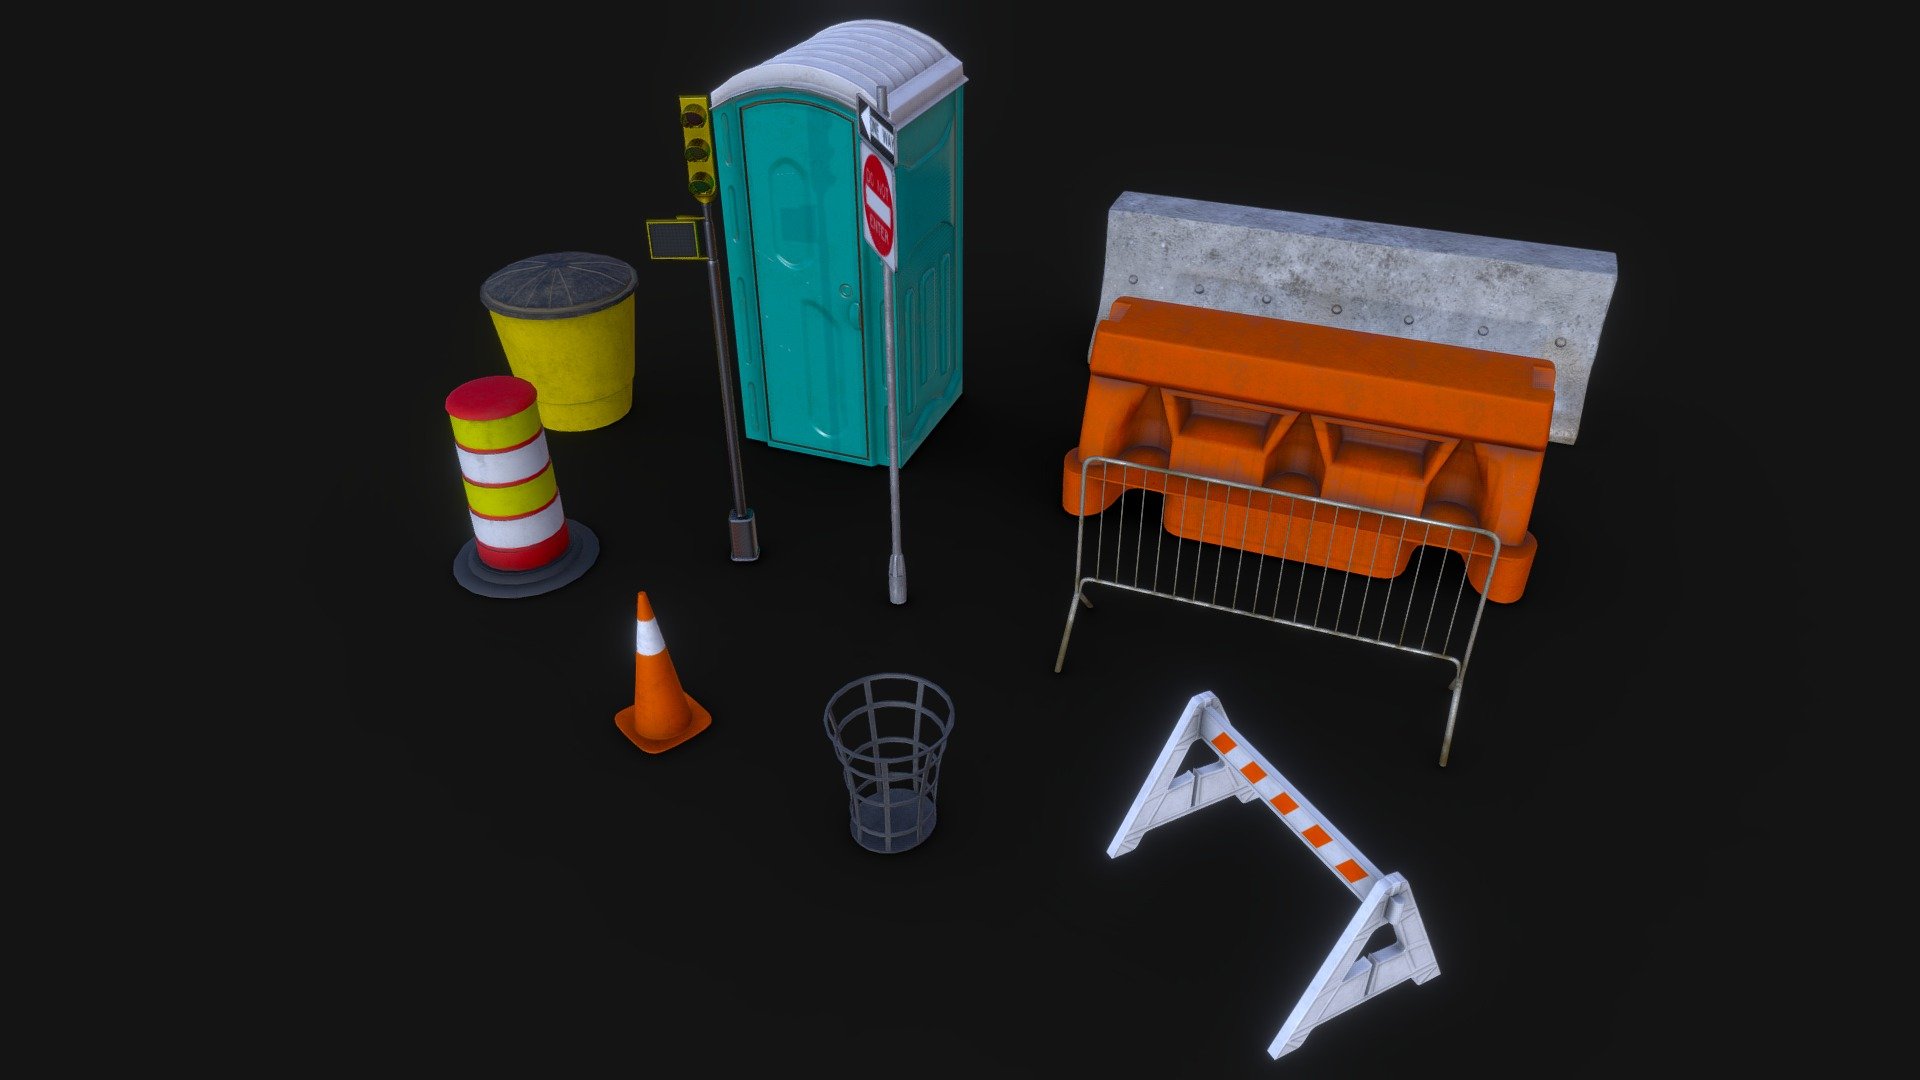 Street Props
Textures And Materials : Each model have one material with one PBR textures set in TIF format Each Model Textures Contain : Albedo 4K - Metalic 4k - Roughness 4K - Normal Map 4K - unity Mask Map 4K

Geometry : 11 Street Objects

Polygon count Total: 14530 Tris - 7540 Verts

Traffic_Cone : 520 Tris - 262 verts

Traffic_Drum : 838 Tris - 421 verts

Plastic_Barricade : 1918 Tris - 961 verts

Street_Sign : 1688 Tris - 954 verts

Traffic_Barrier : 804 Tris - 400 verts

Traffic_Light : 2464 Tris - 1235 verts

Fence_Barrier : 1464 Tris - 868 verts

Plastic_Water_Barrier : 576 Tris - 290 verts

Trash_Can : 1176 Tris - 562 verts

Portable_Toilet : 2022 Tris - 1055 verts

Concrete_Road_Block : 1060 Tris - 532 verts

UV Mapped with non-overlapping

Model is available in 5 file formats FBX - OBJ - Maya 2020 - Blender - UnityPackage - Street Props - Buy Royalty Free 3D model by Talaei (@habedi) 3d model